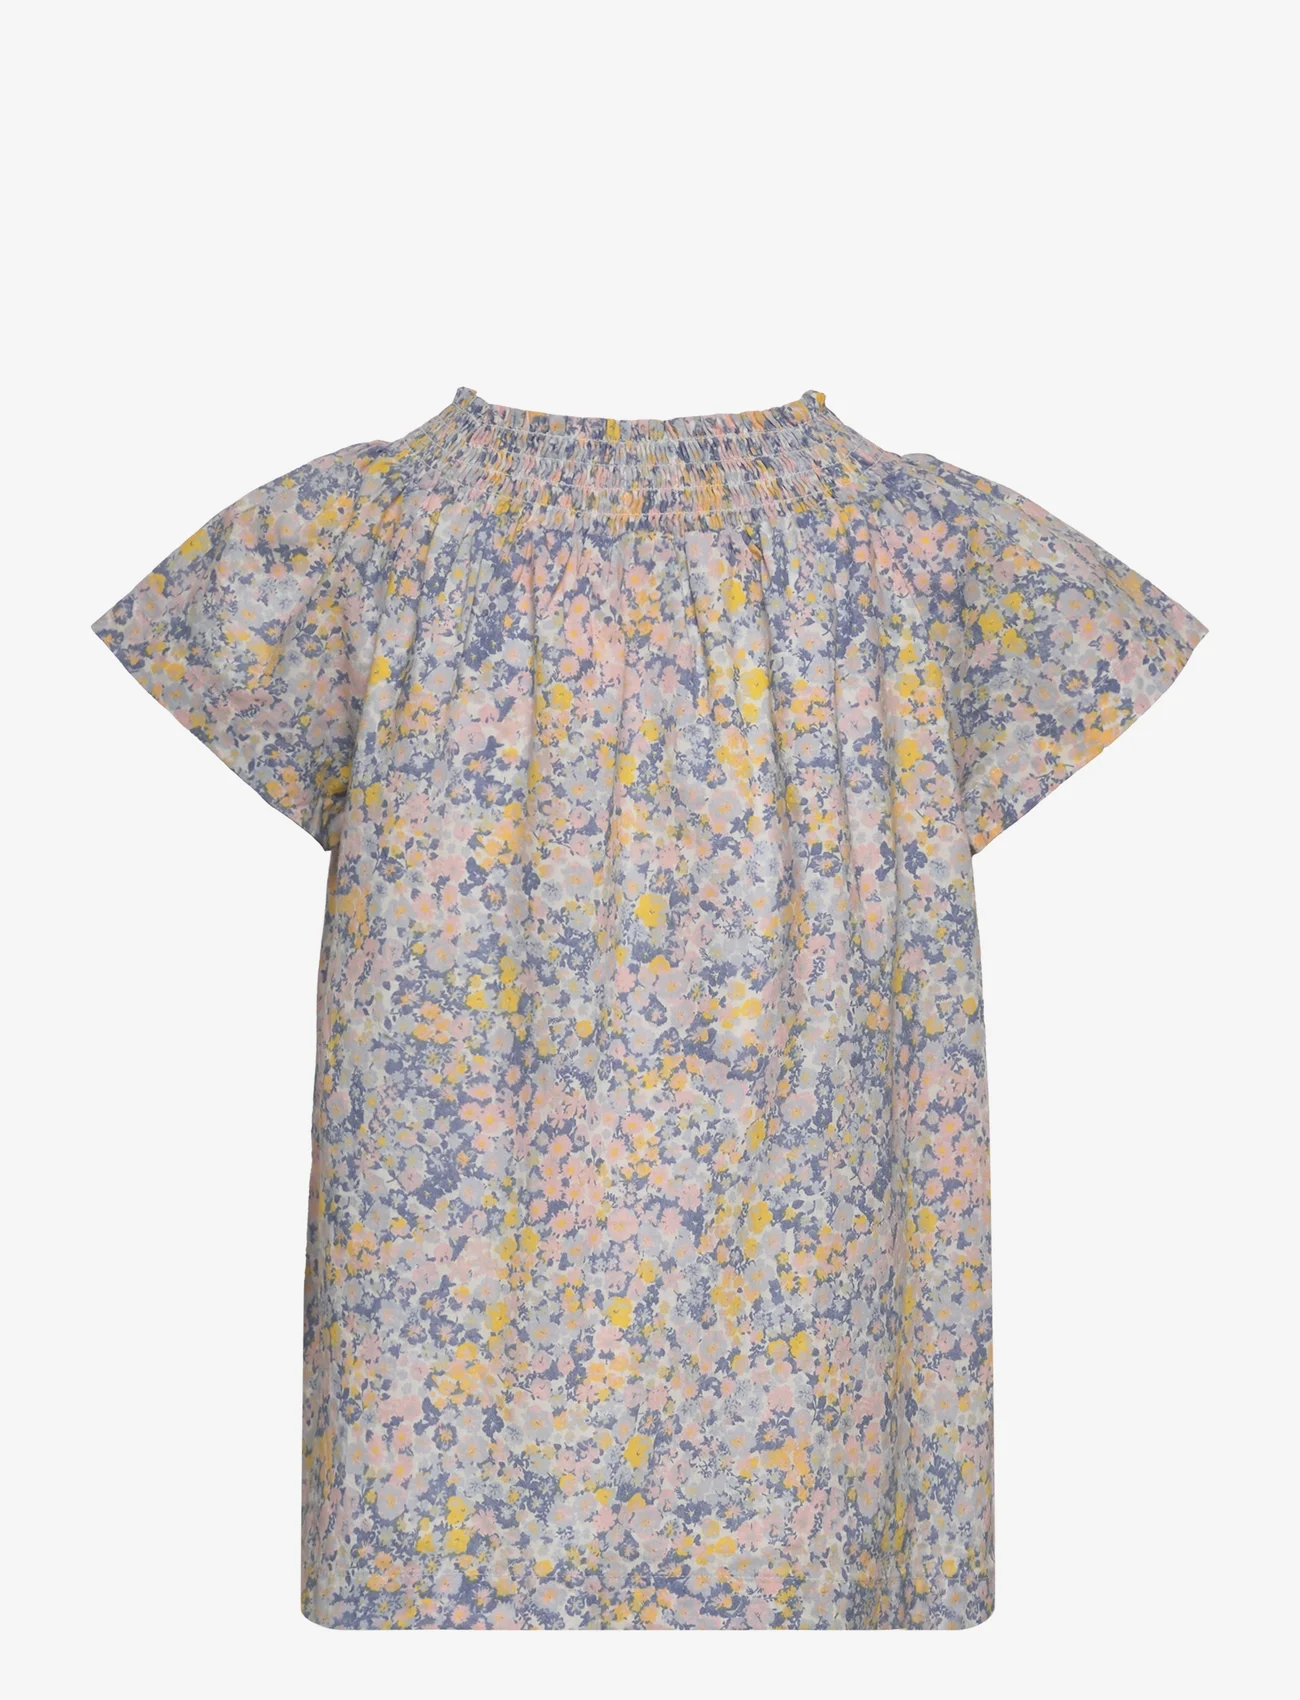 Creamie - Top Cotton - sommarfynd - lotus - 1